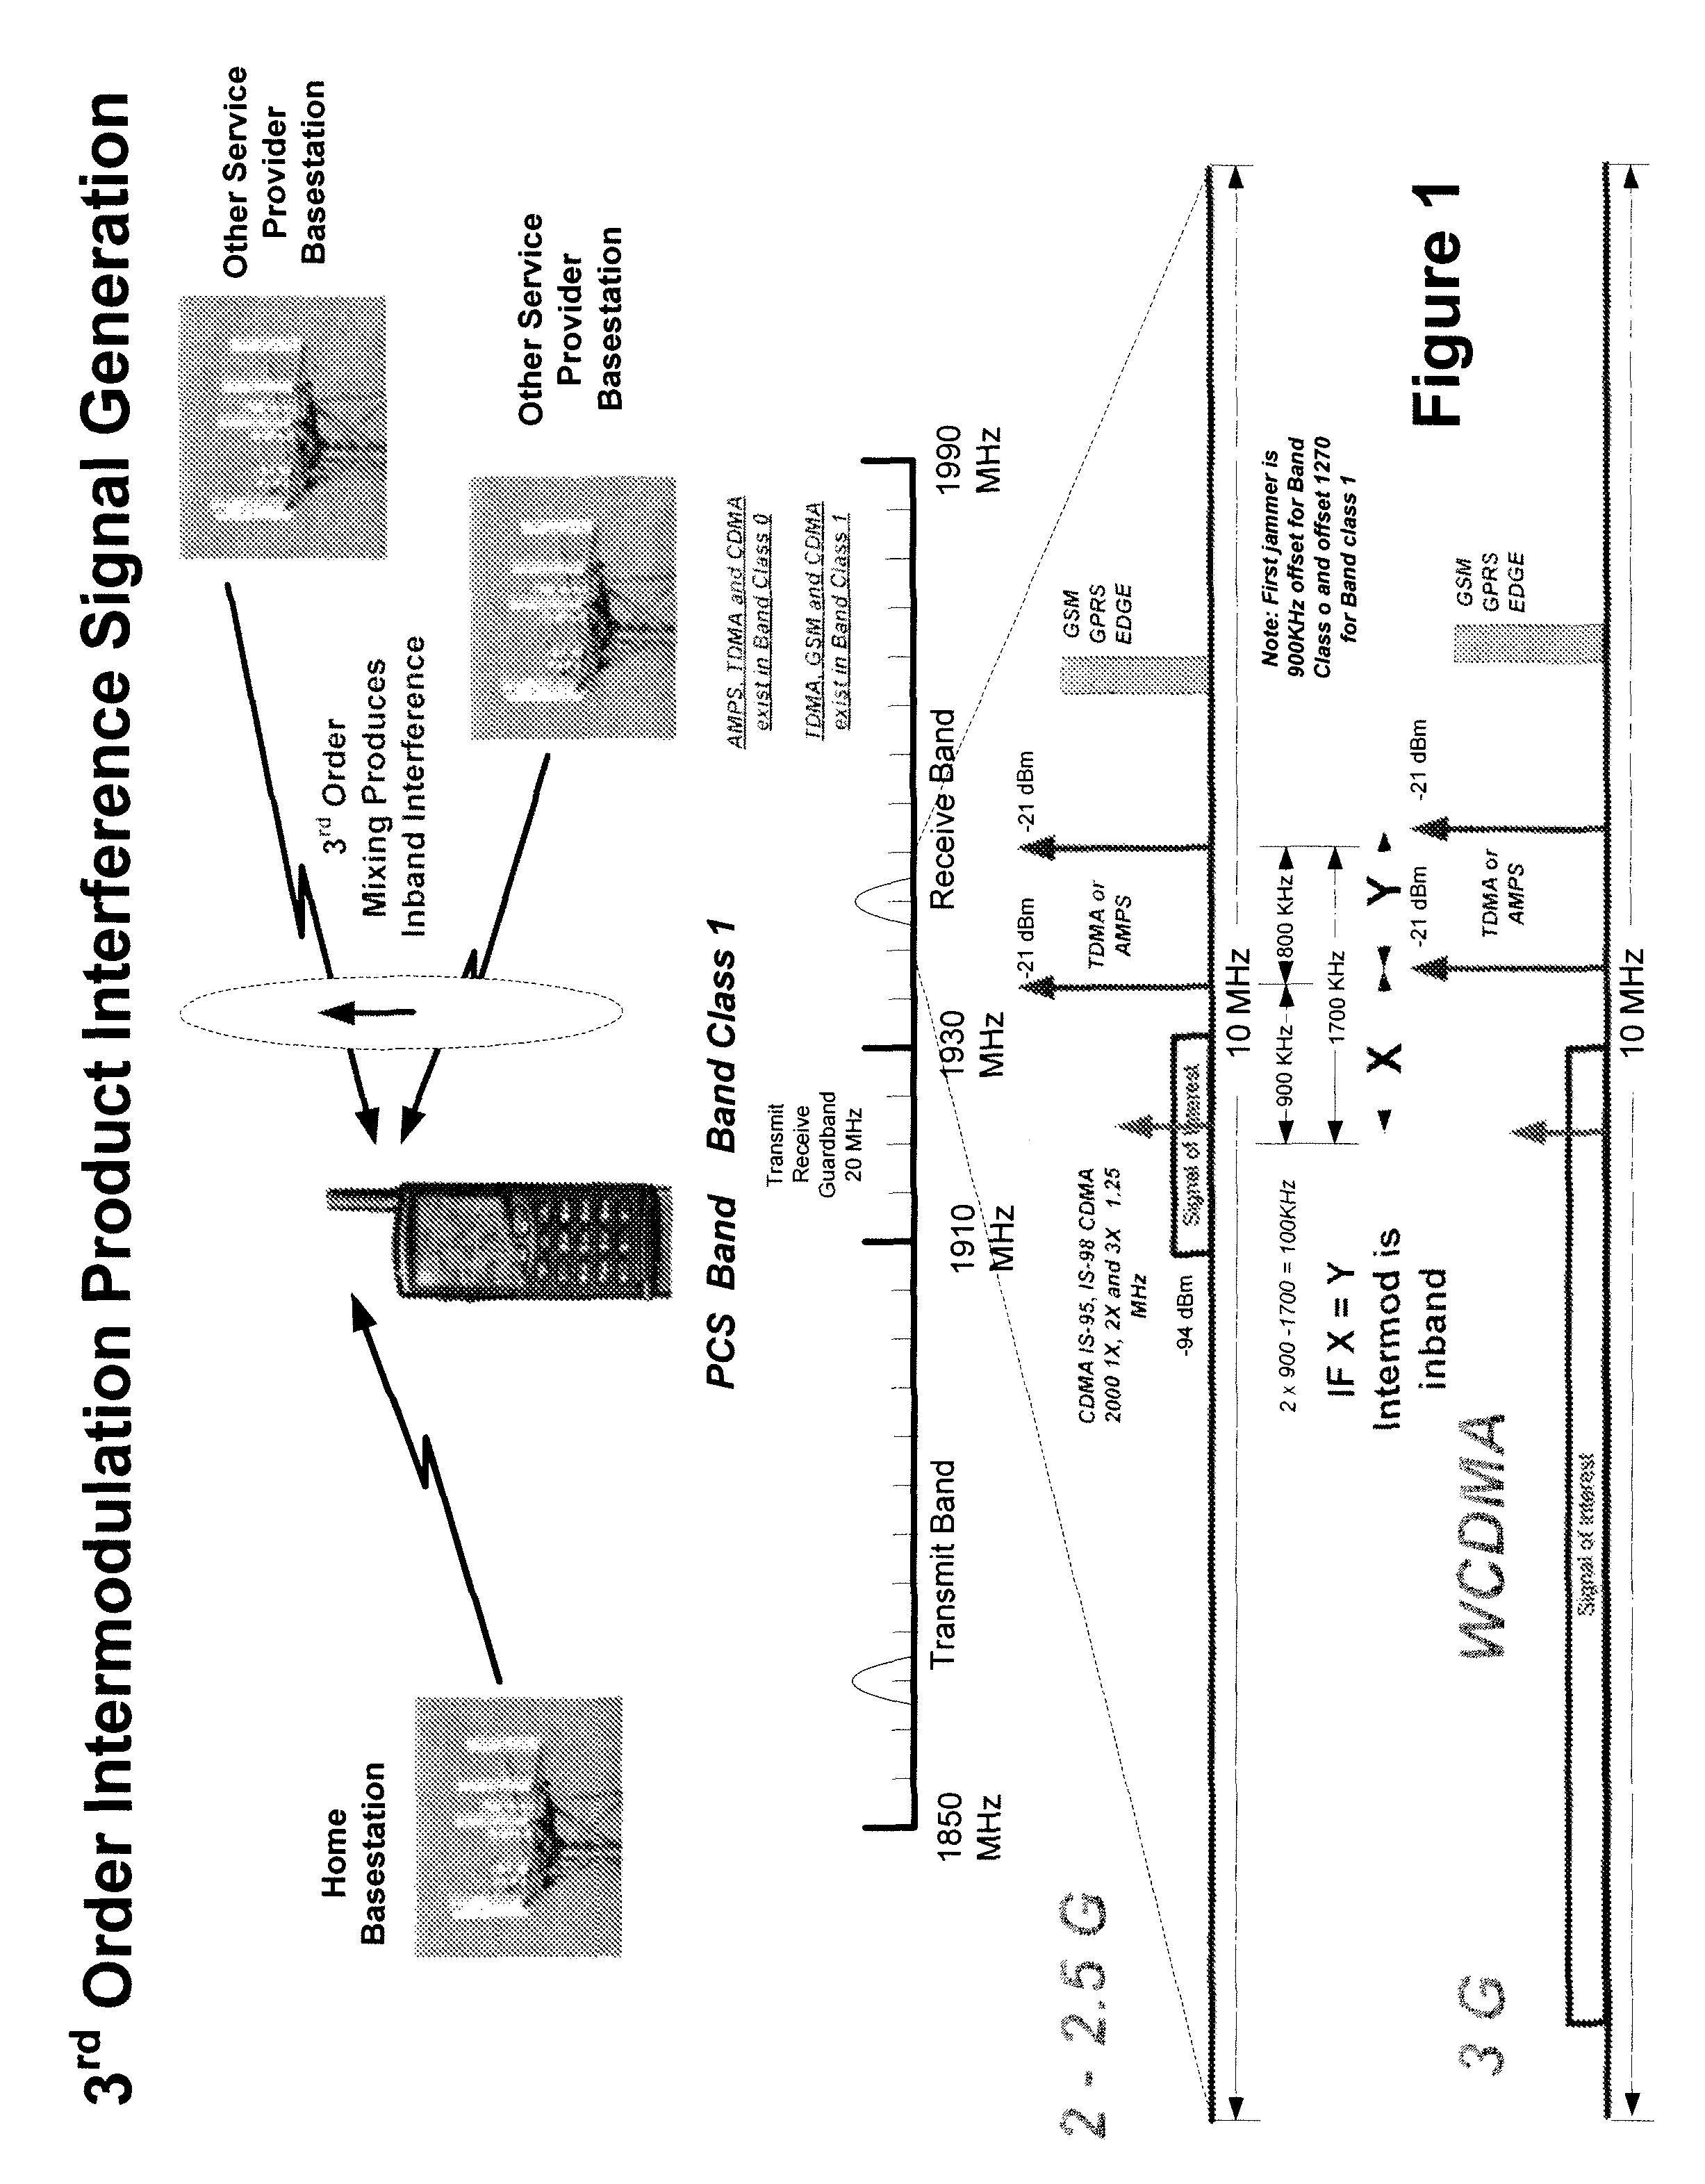 Multi-mode—multi-band direct conversion receiver with complex I and Q channel interference mitigation processing for cancellation of intermodulation products